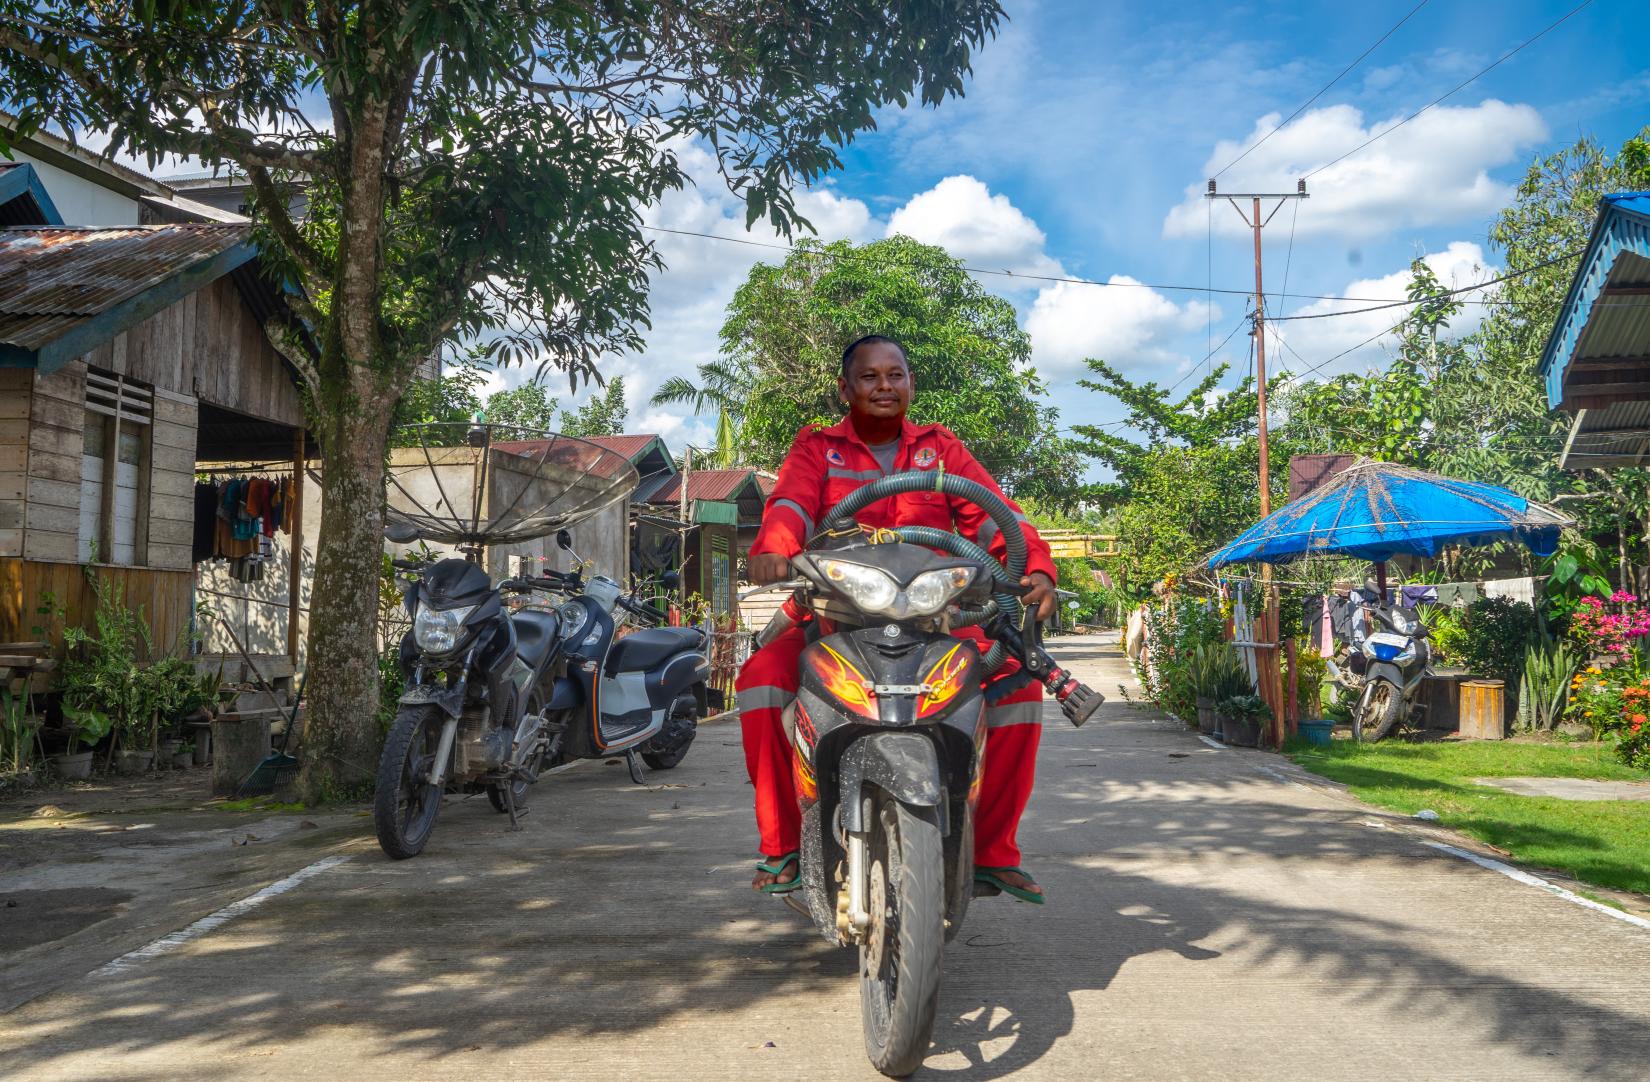 A man in fire fighter suit is riding a motorcycle in a village